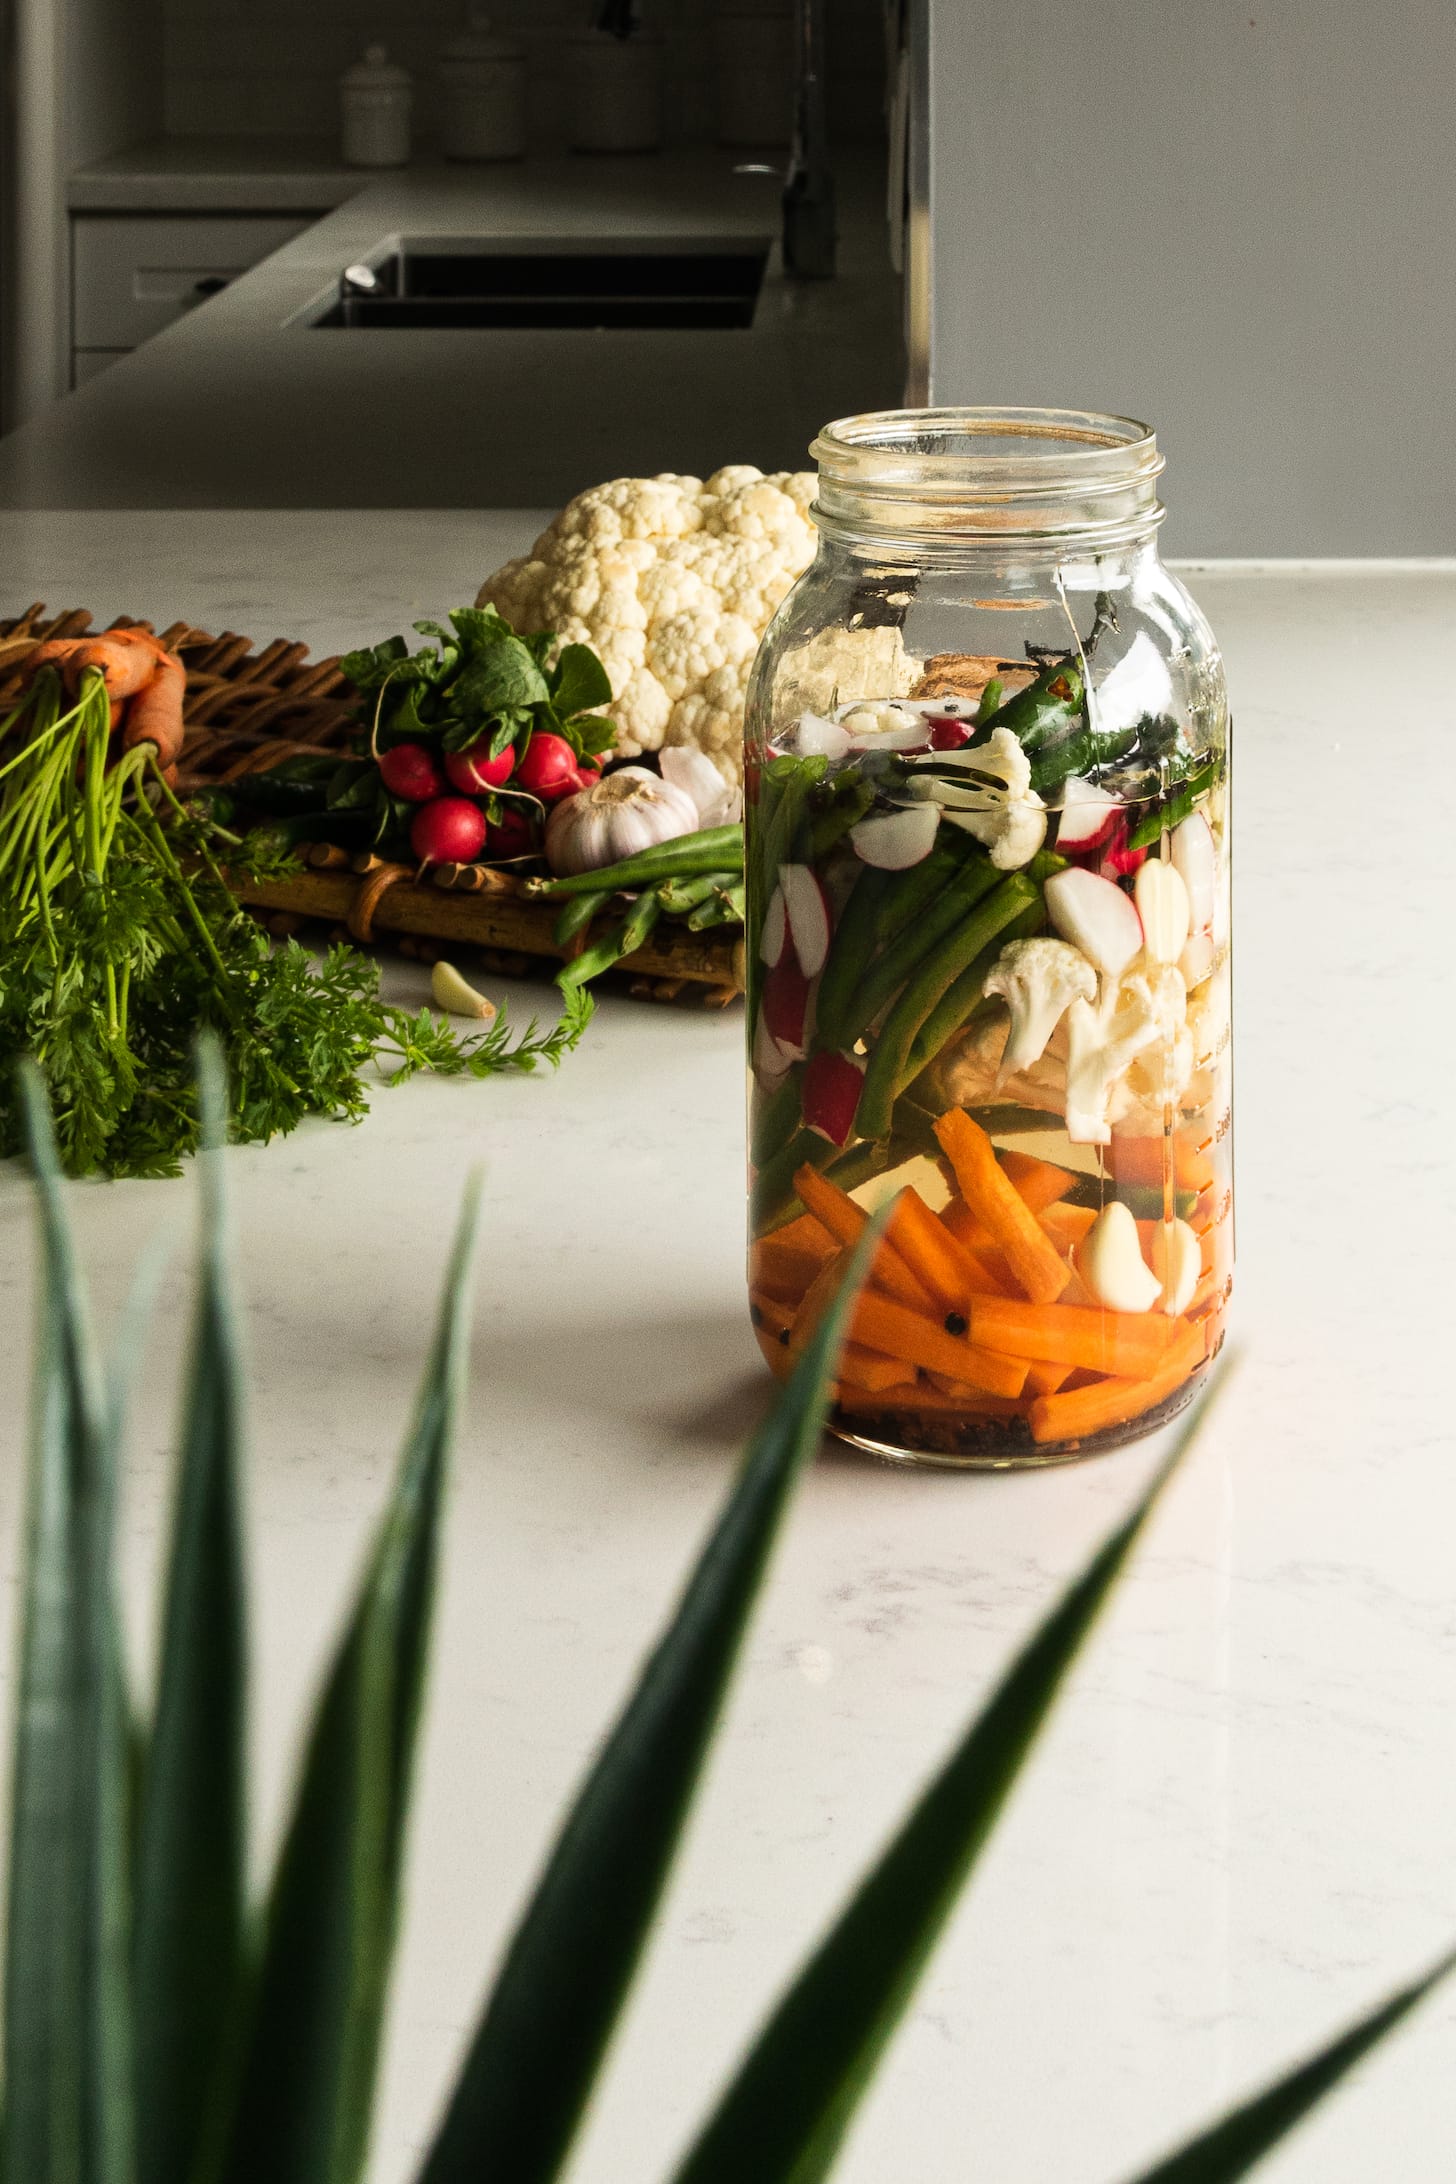 a jar of mixed vegetables in water with a plant in the foreground and vegetables in the background.